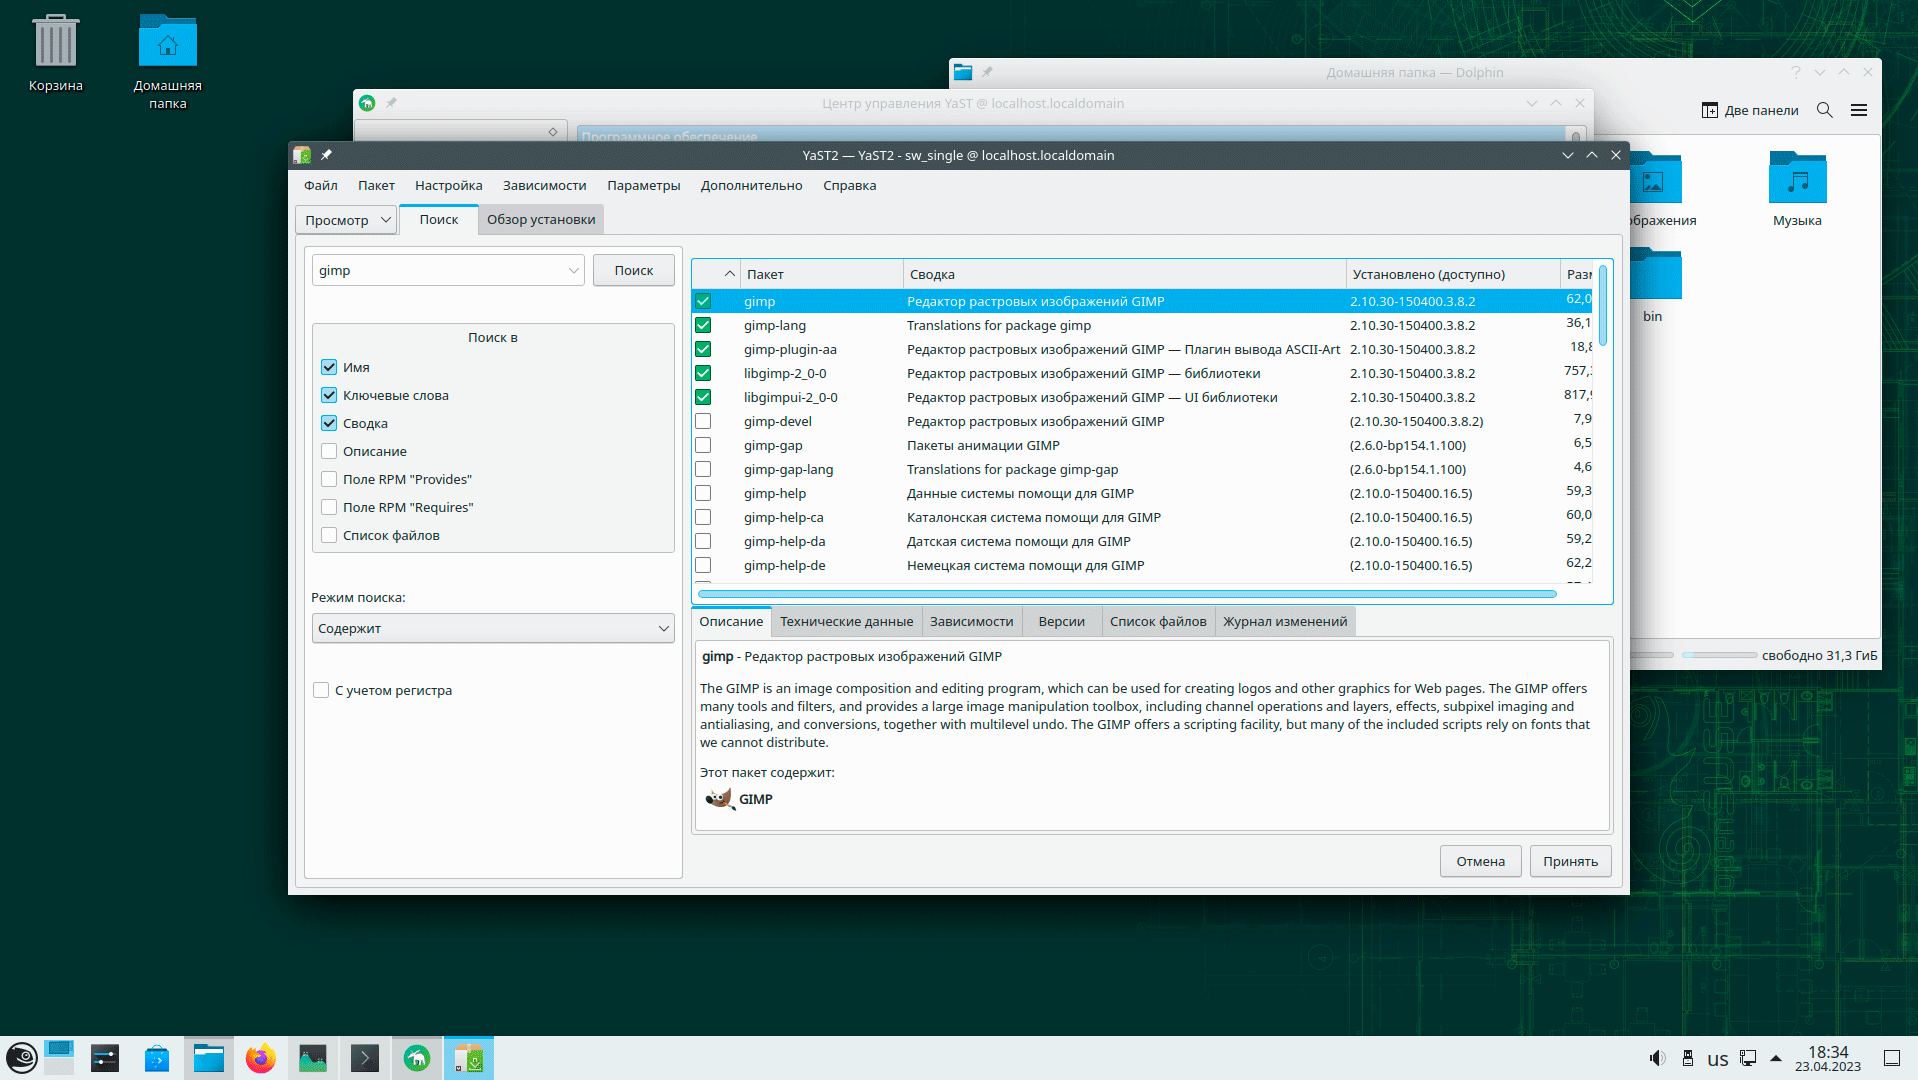 https://interface31.ru/tech_it/images/openSUSE-Leap-Tumbleweed-019.png